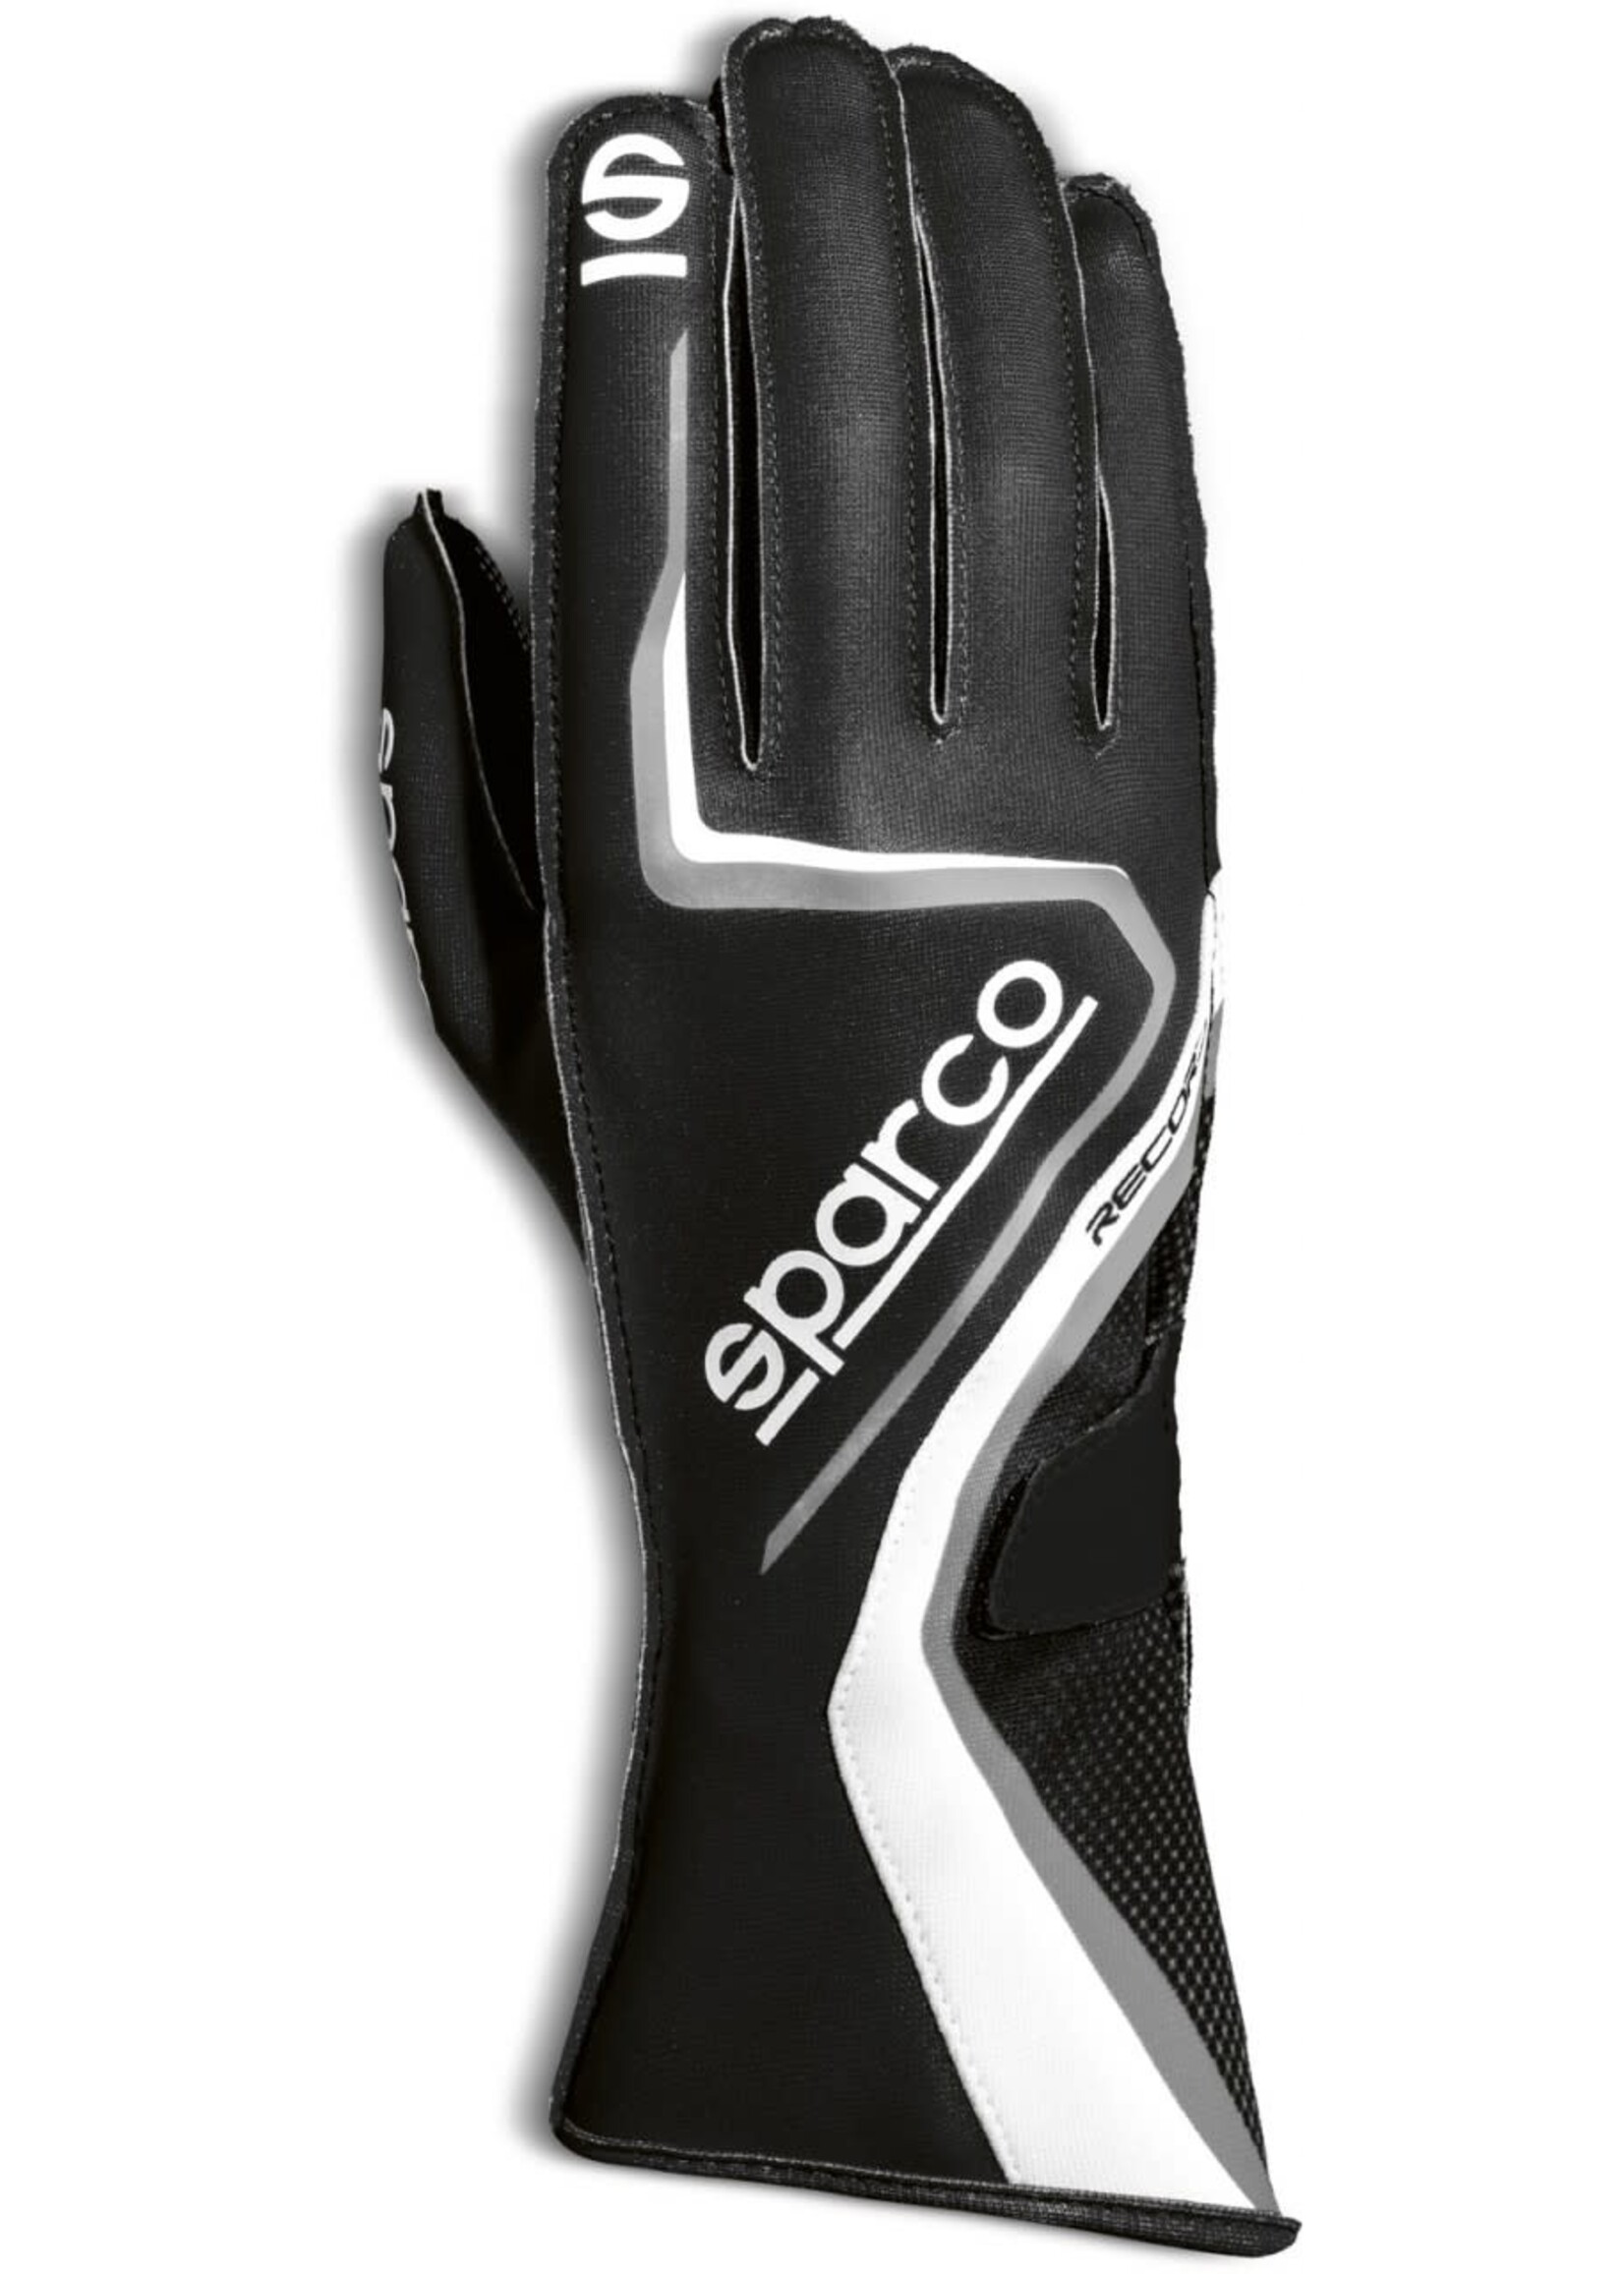 Sparco Sparco gloves Record